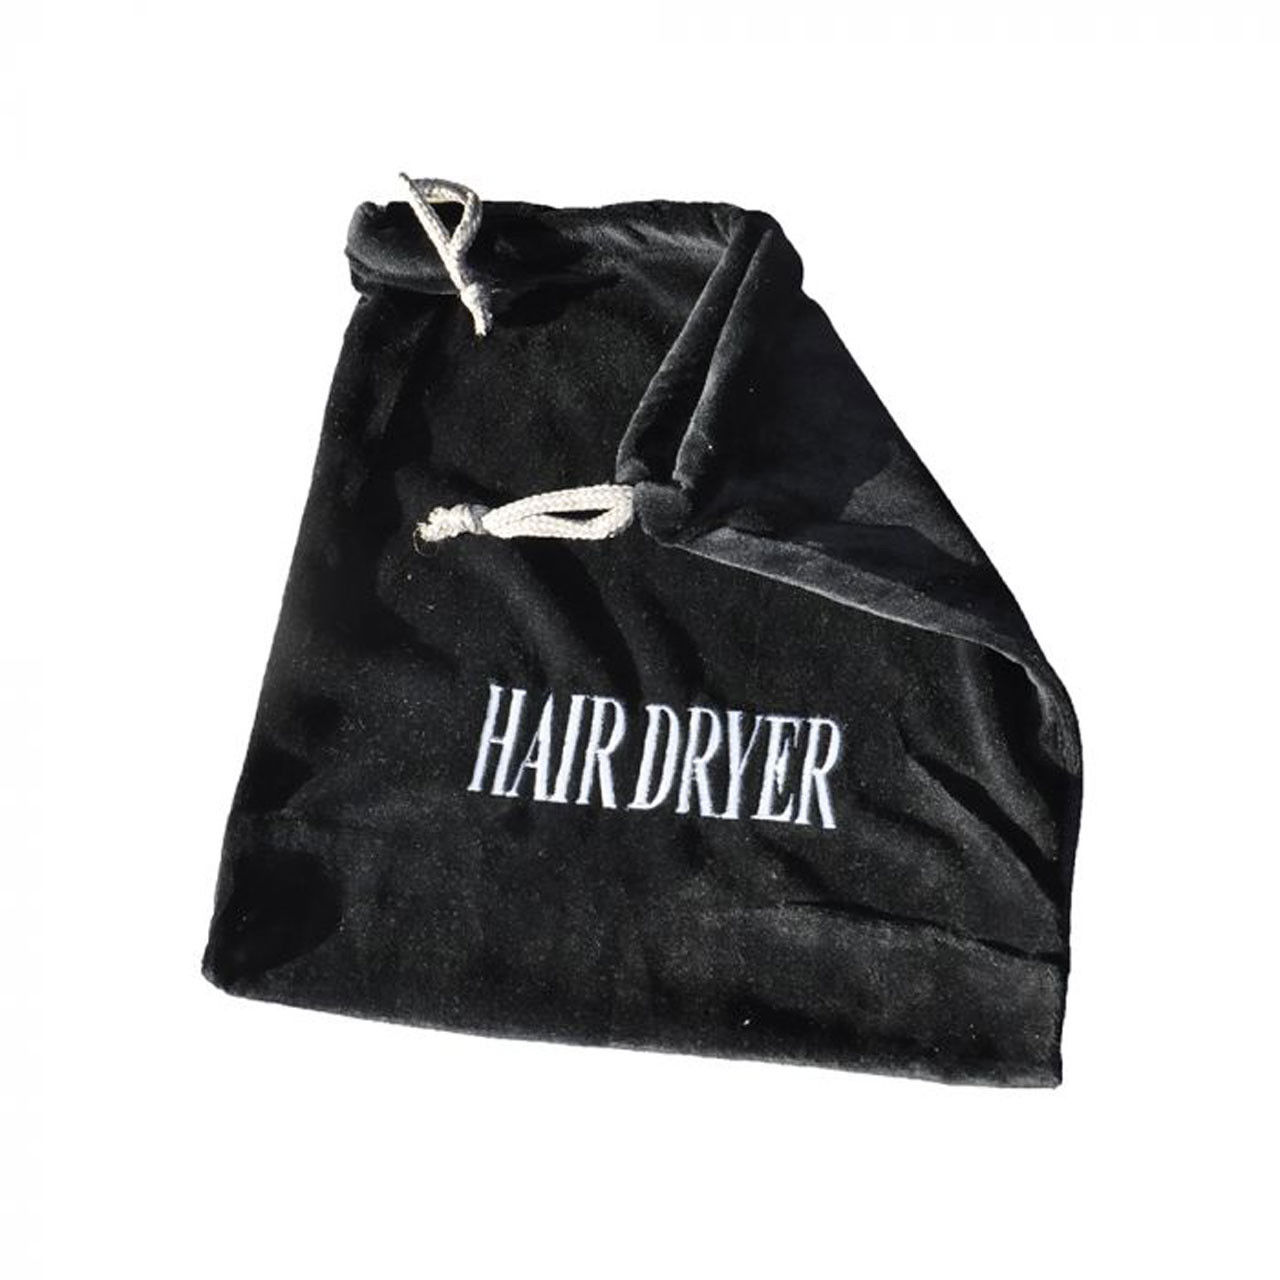 Hair Dryer Bag in Black with Embroidery Questions & Answers